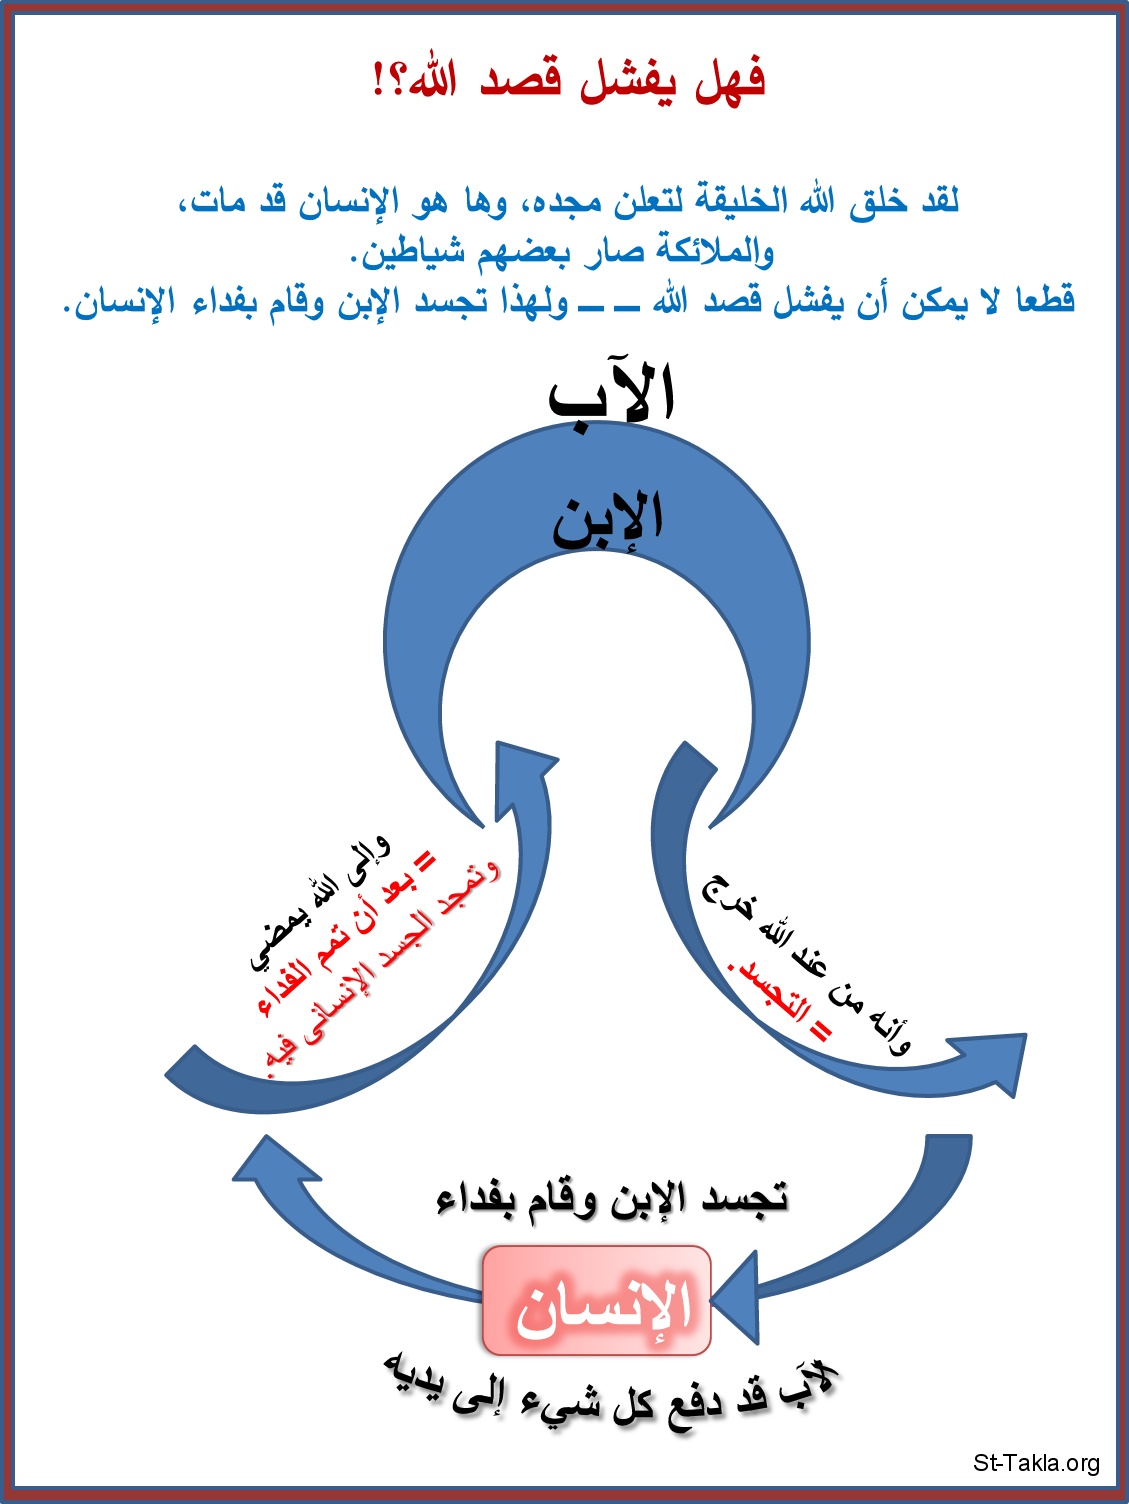 St-Takla.org Image: Man's sin, and God's salvation - graph     :     -  